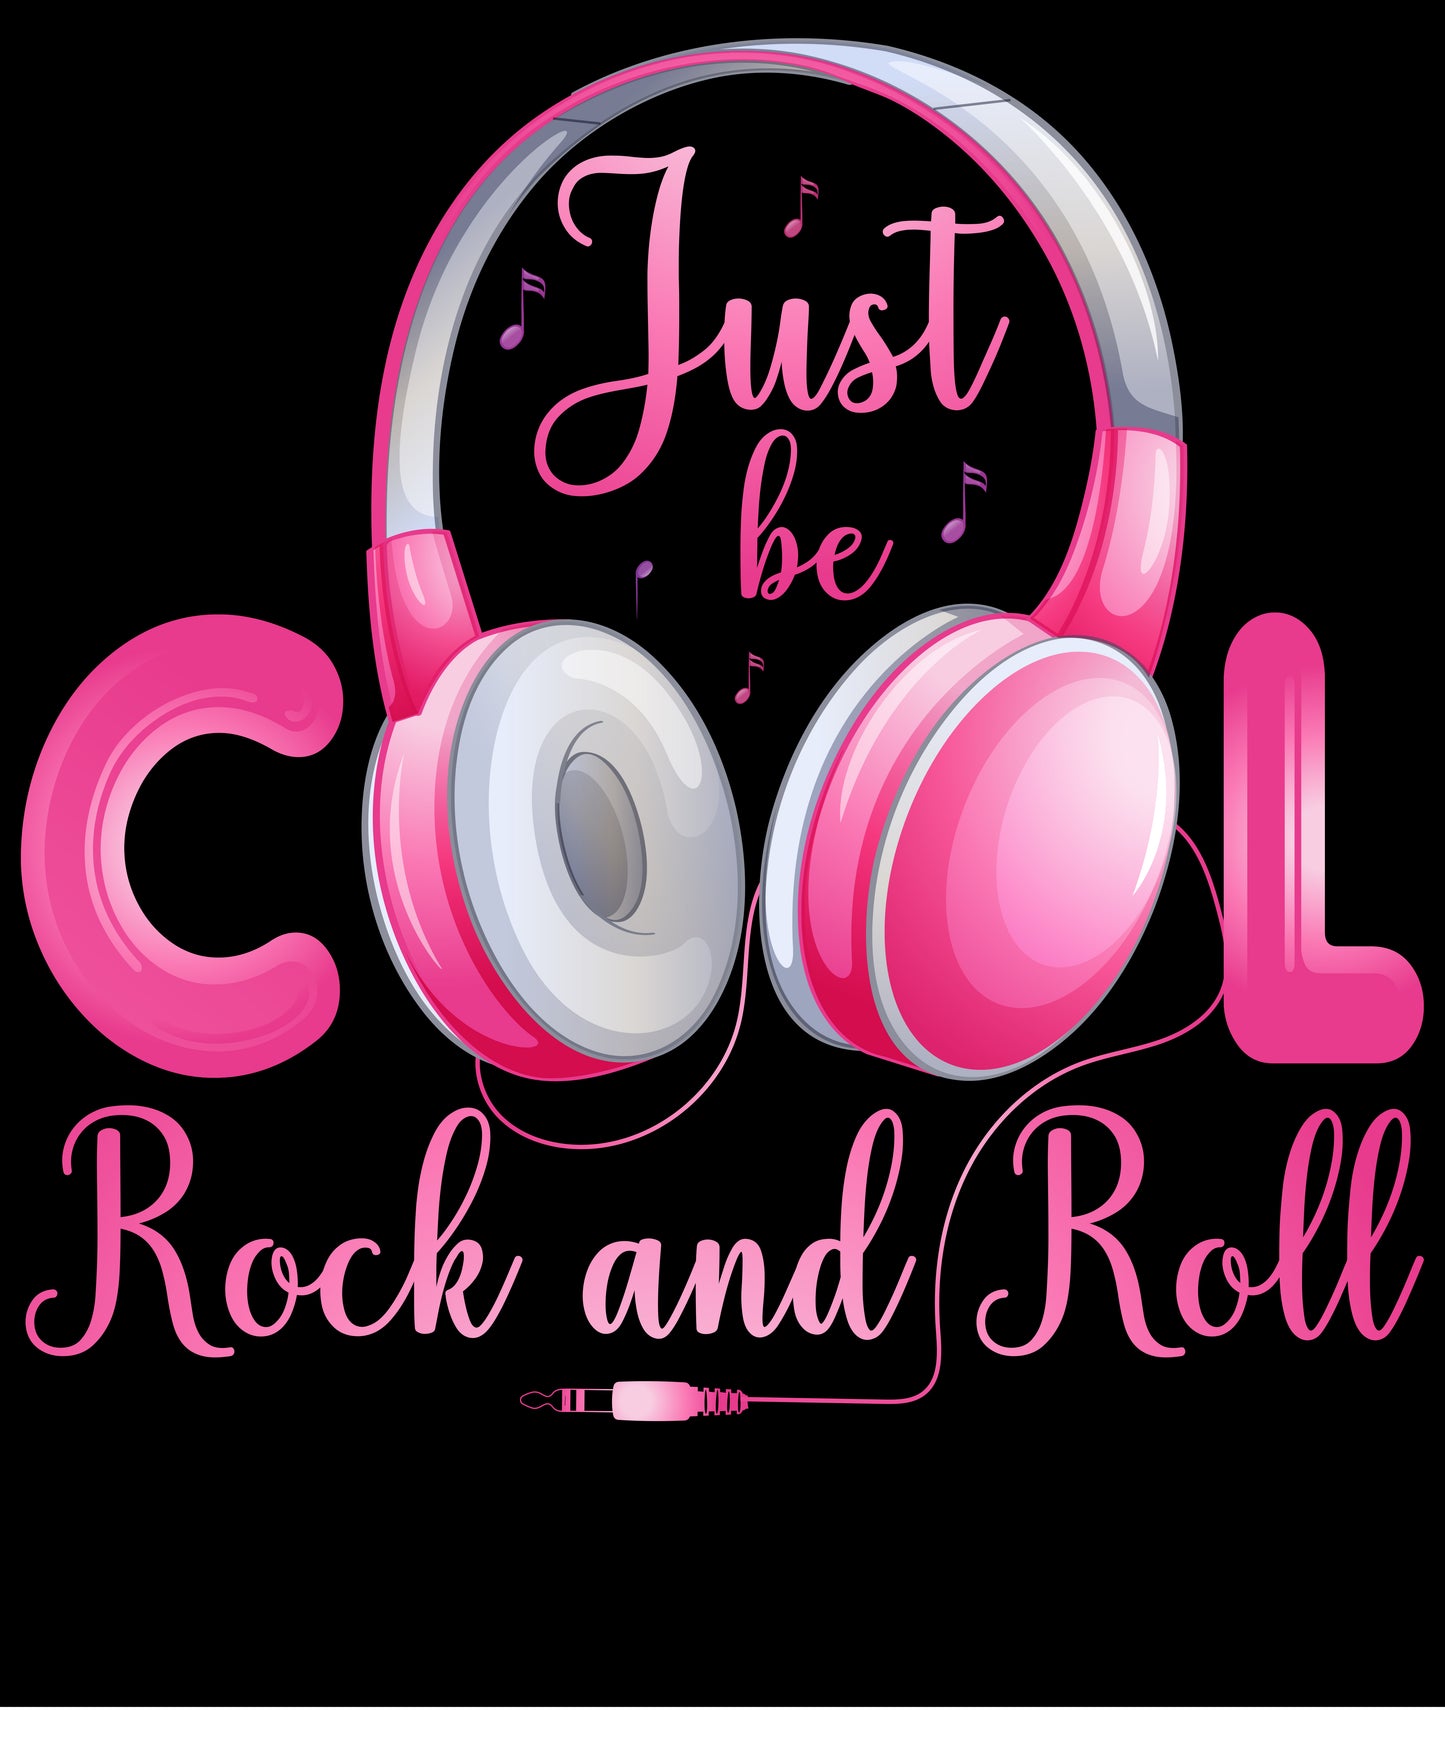 Just be Cool Rock and Roll (004)